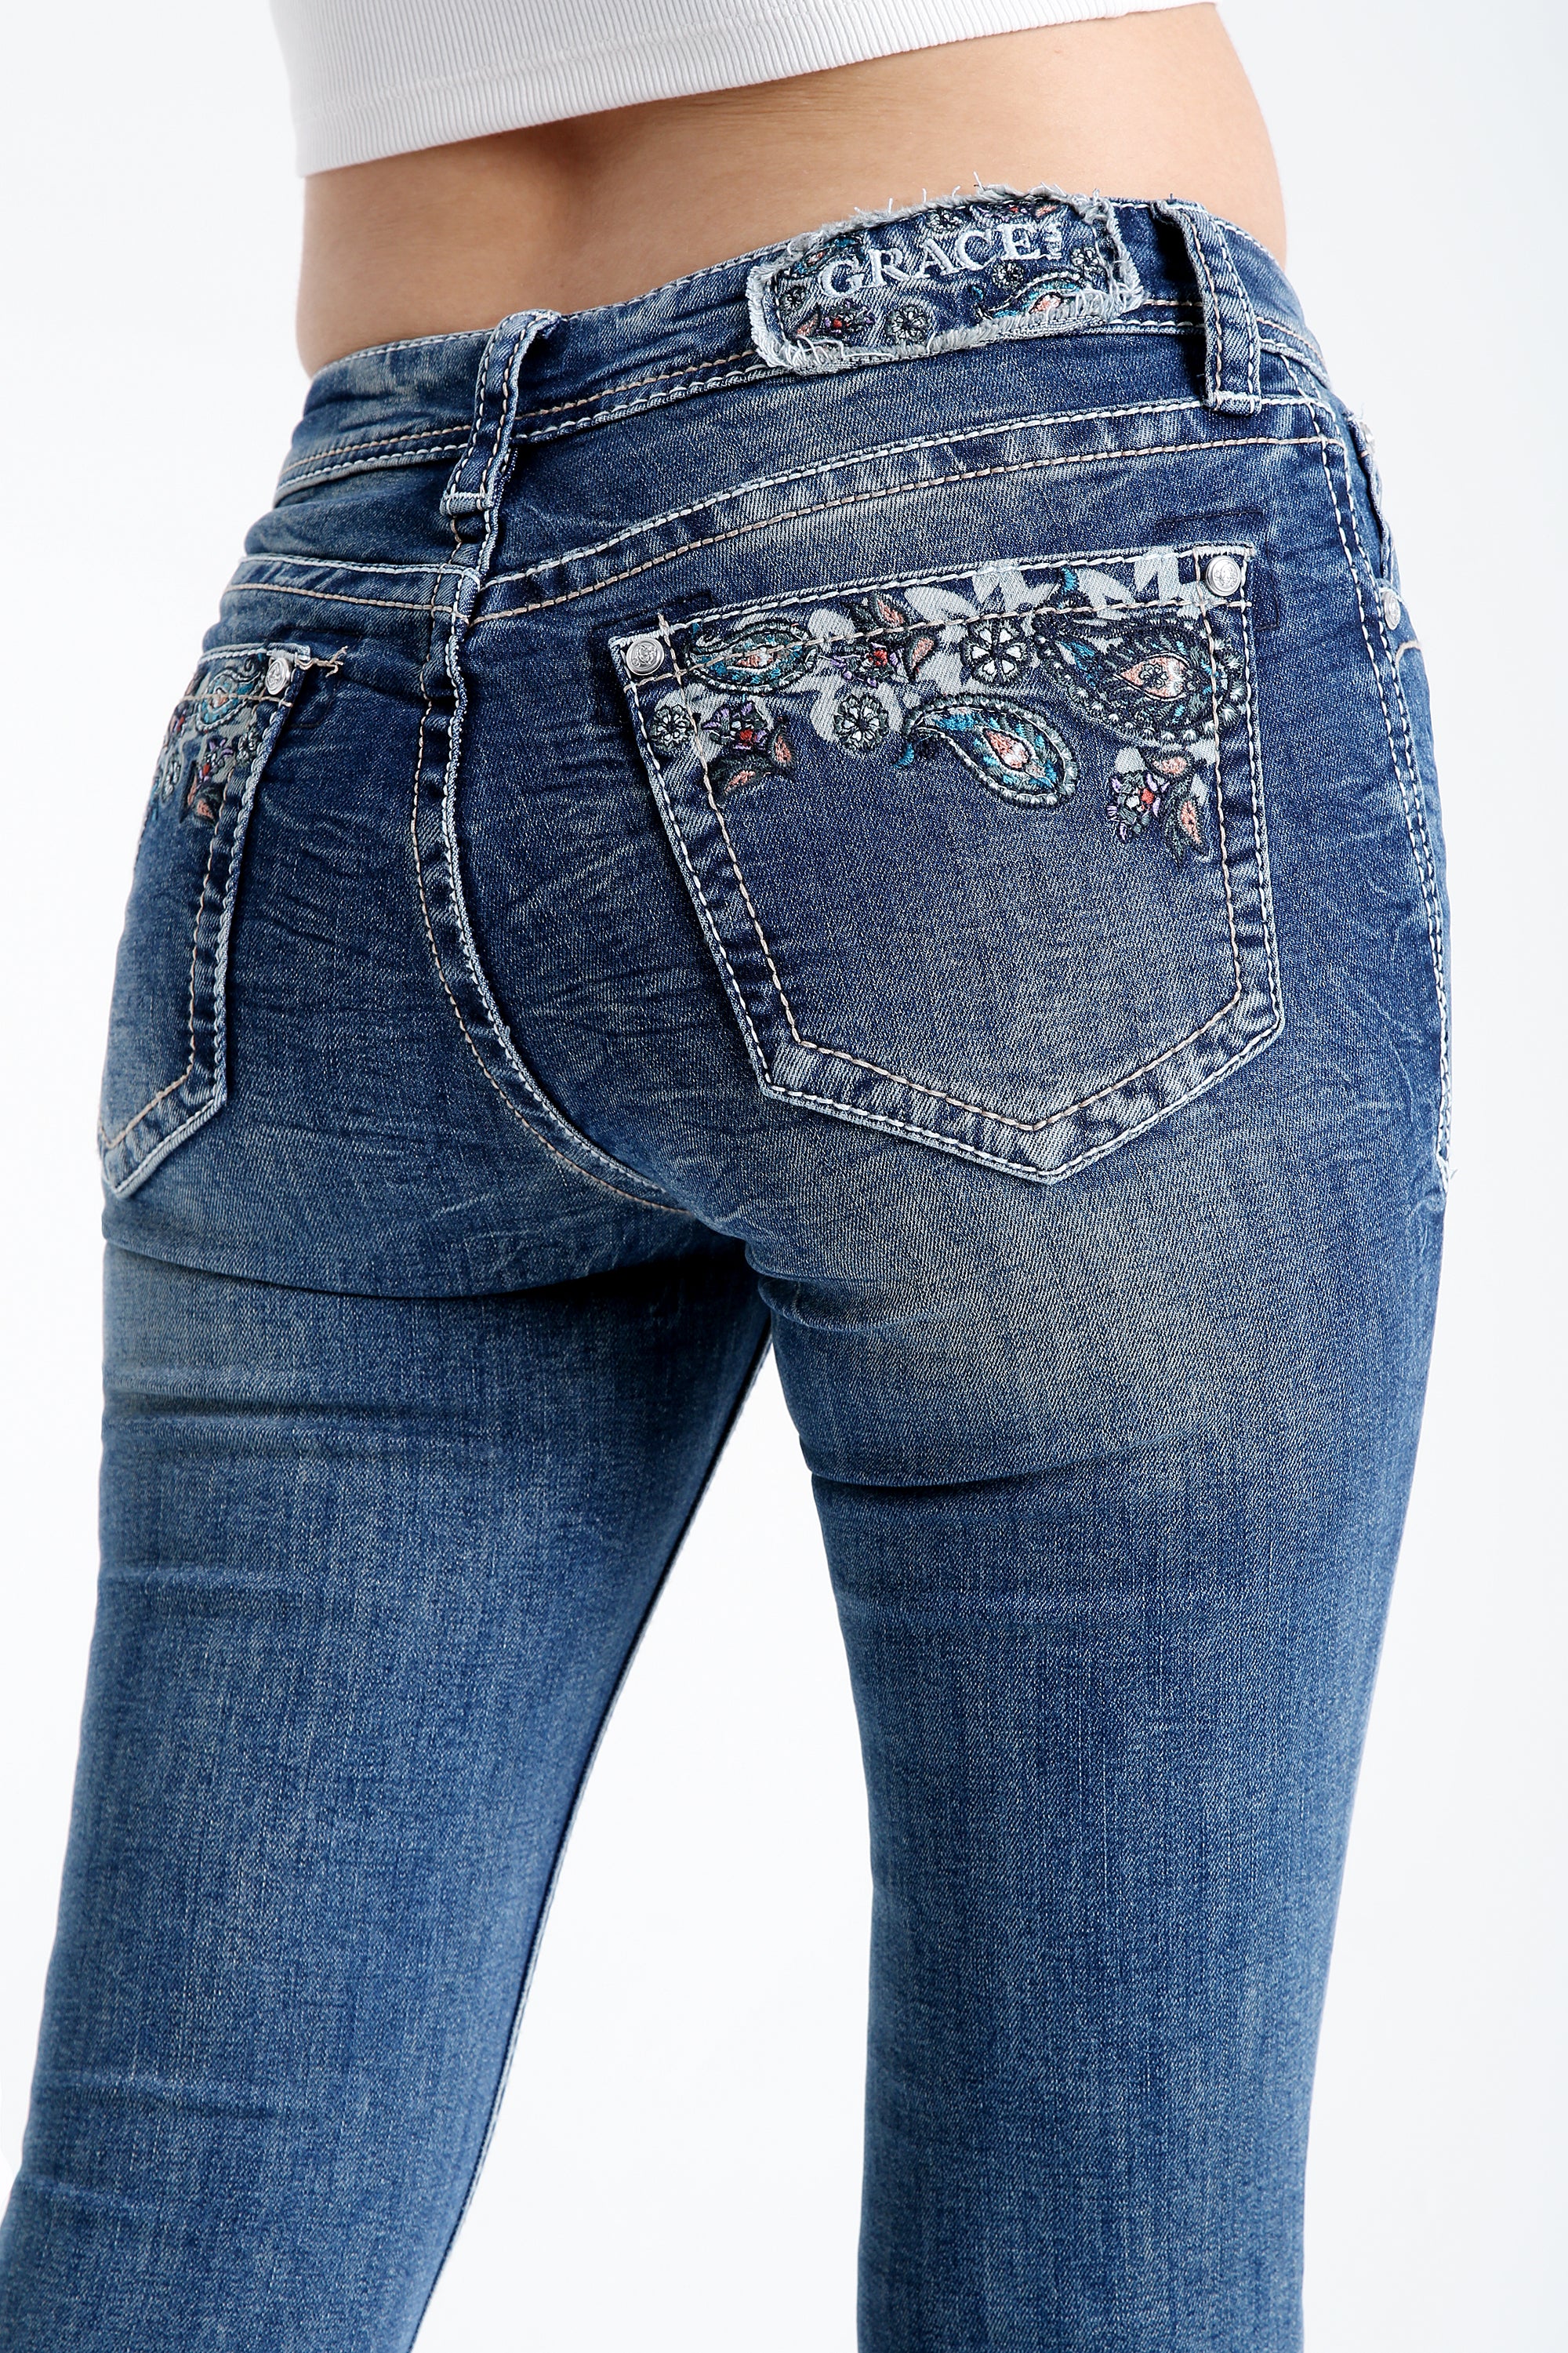 Floral Embroidery/ Hem Detail  Mid Rise Flare Jeans